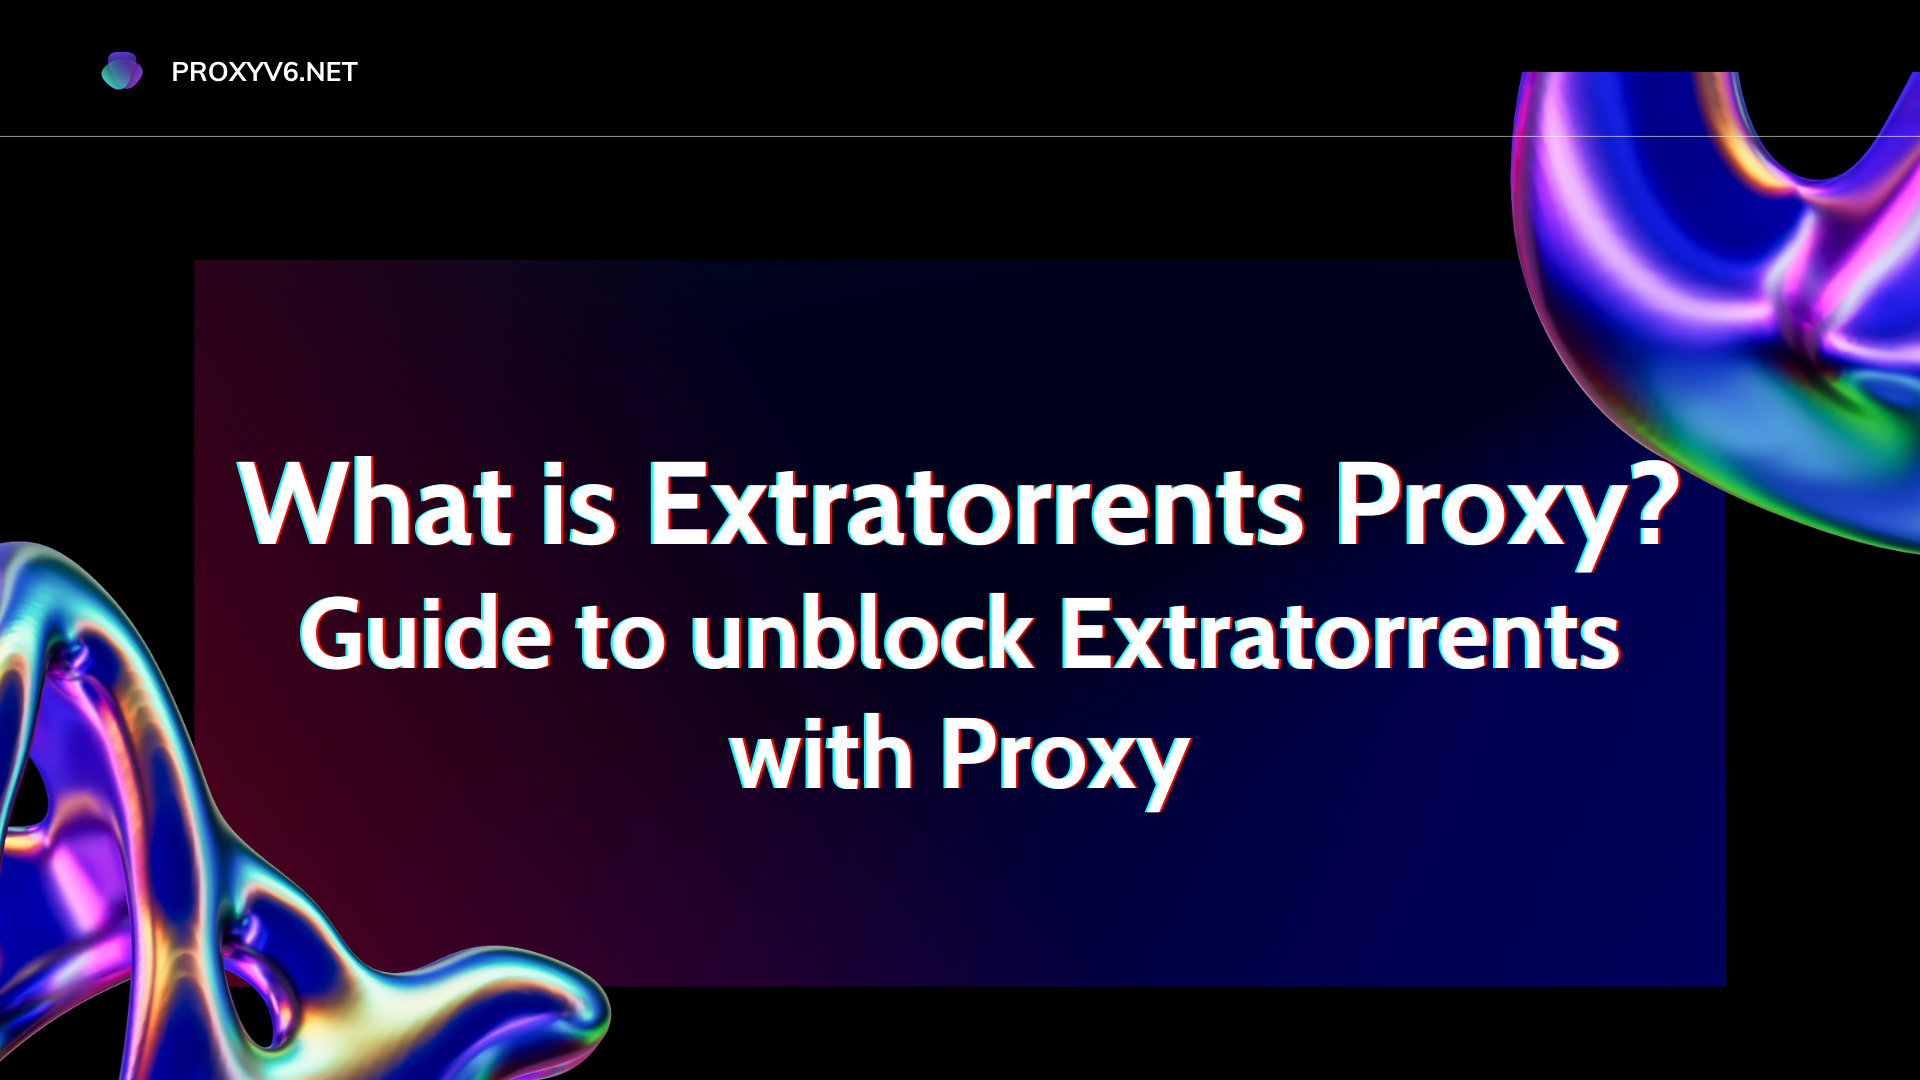 Unblocking Extratorrents: A Comprehensive Guide